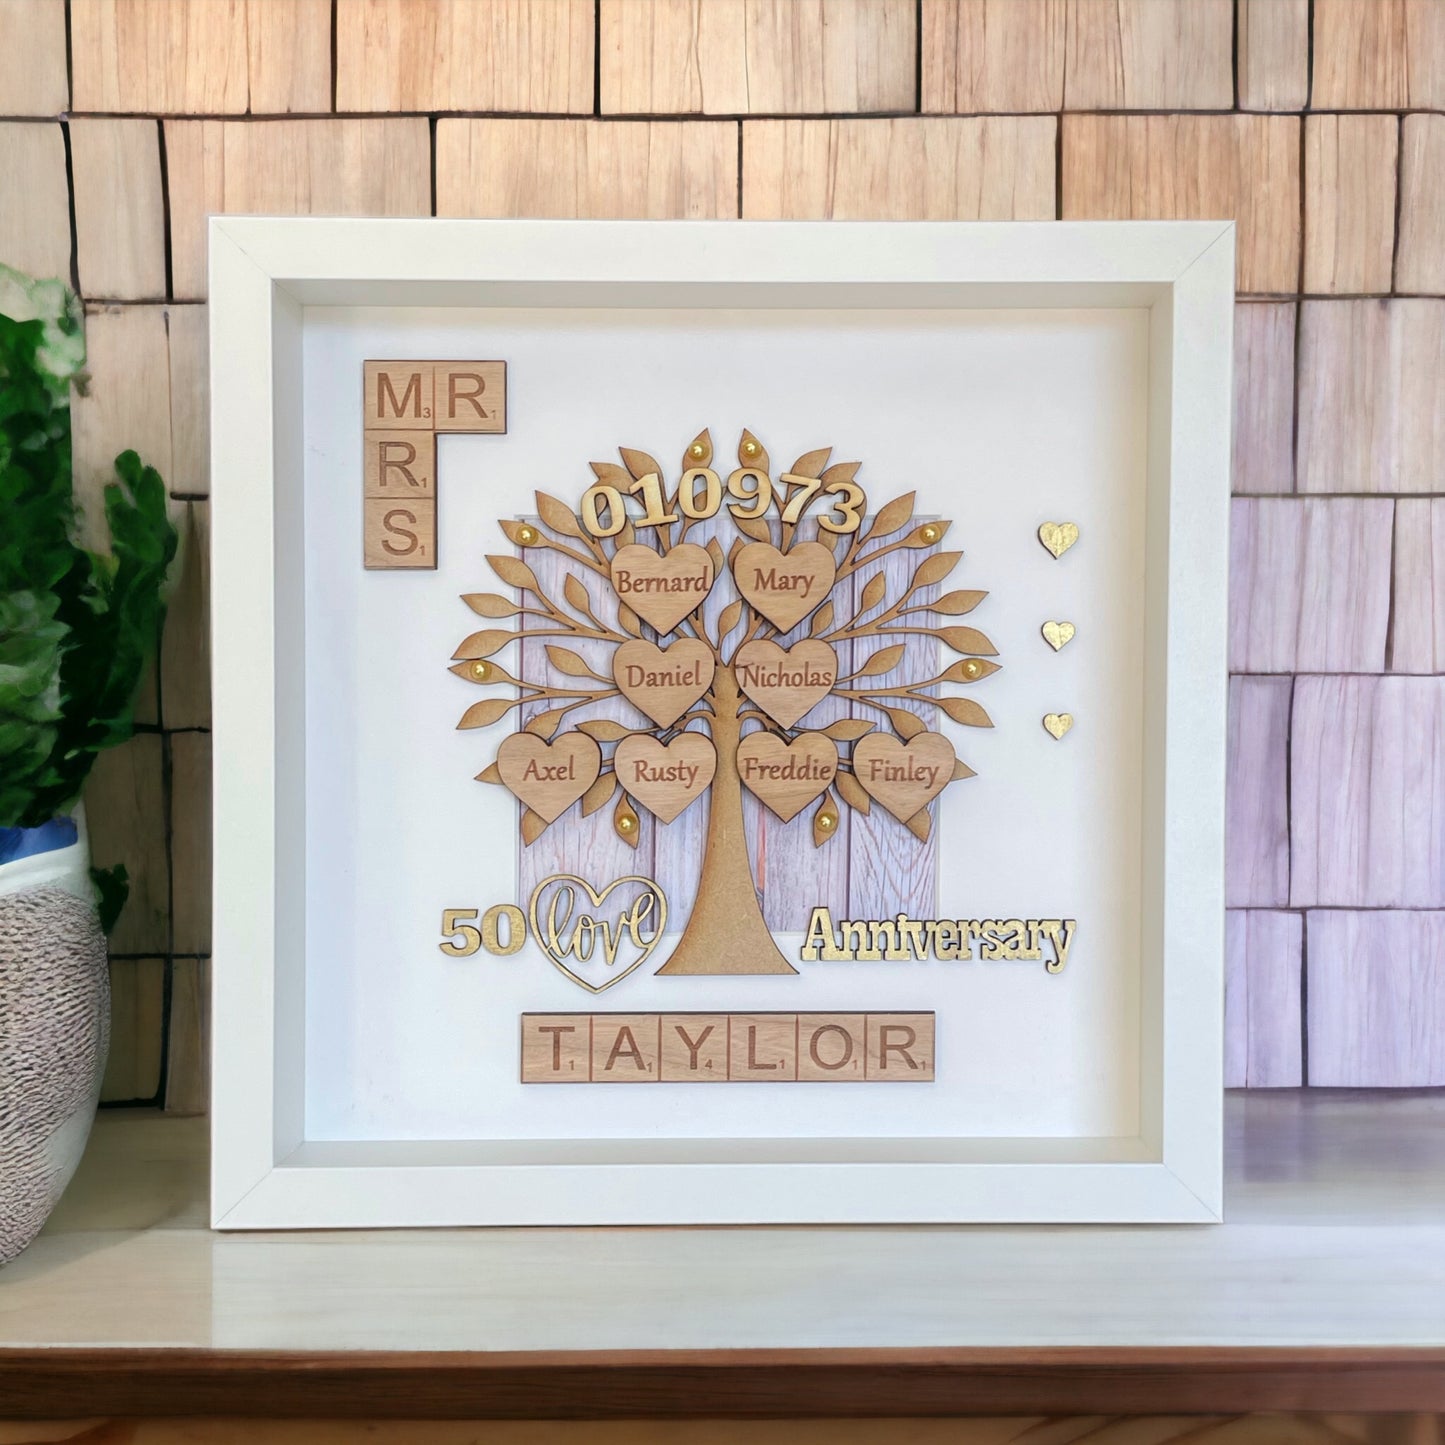 Golden Wedding Anniversary Gift Personalised Scrabble Family Tree Frame | 50th Anniversary